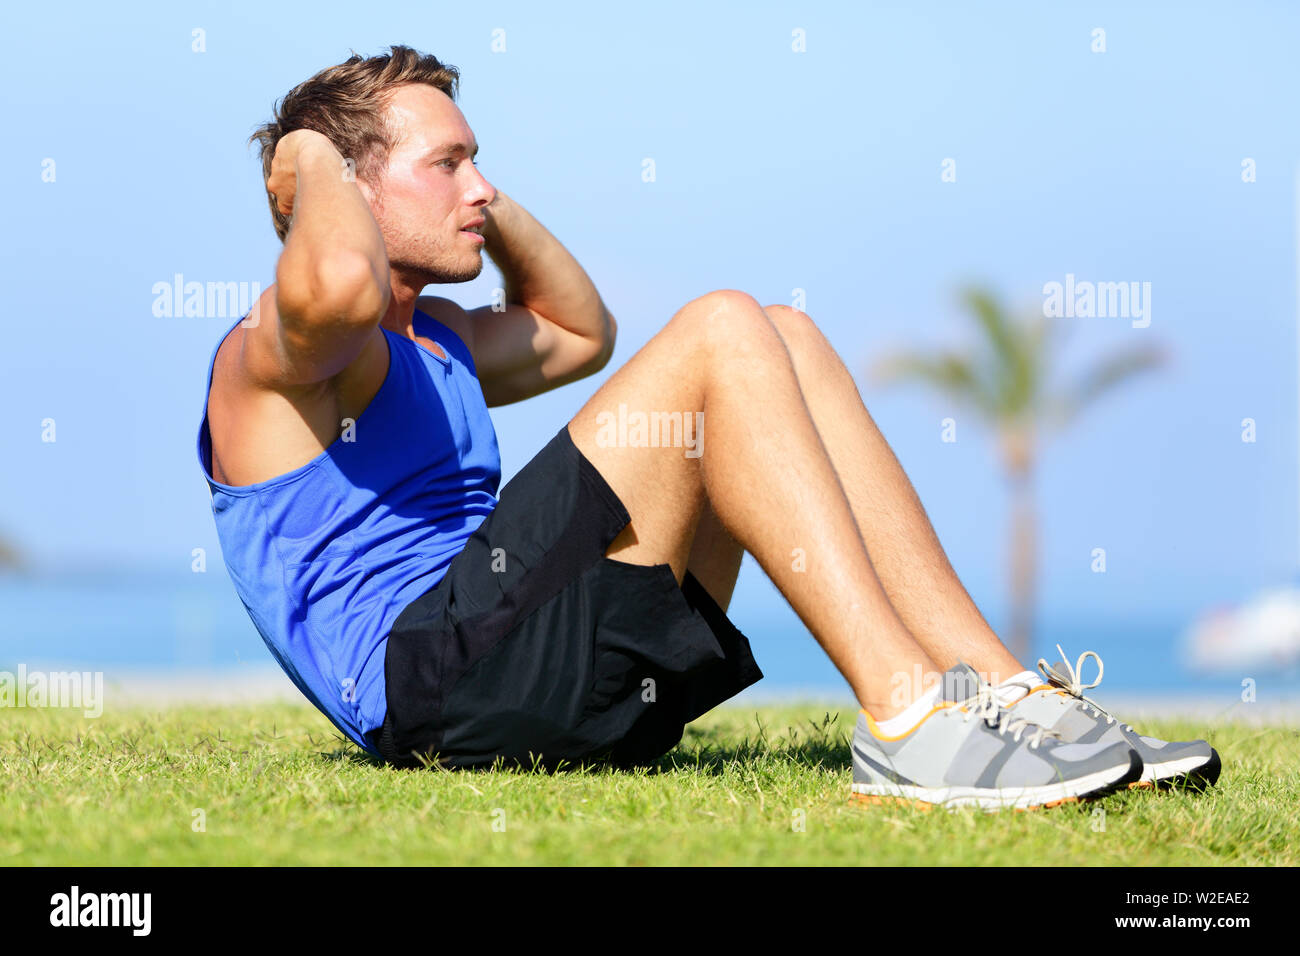 Sit-ups - fitness man training sit up outside in grass in summer. Fit male athlete working out cross training exercising. Caucasian muscular sports model in his 20s. Stock Photo